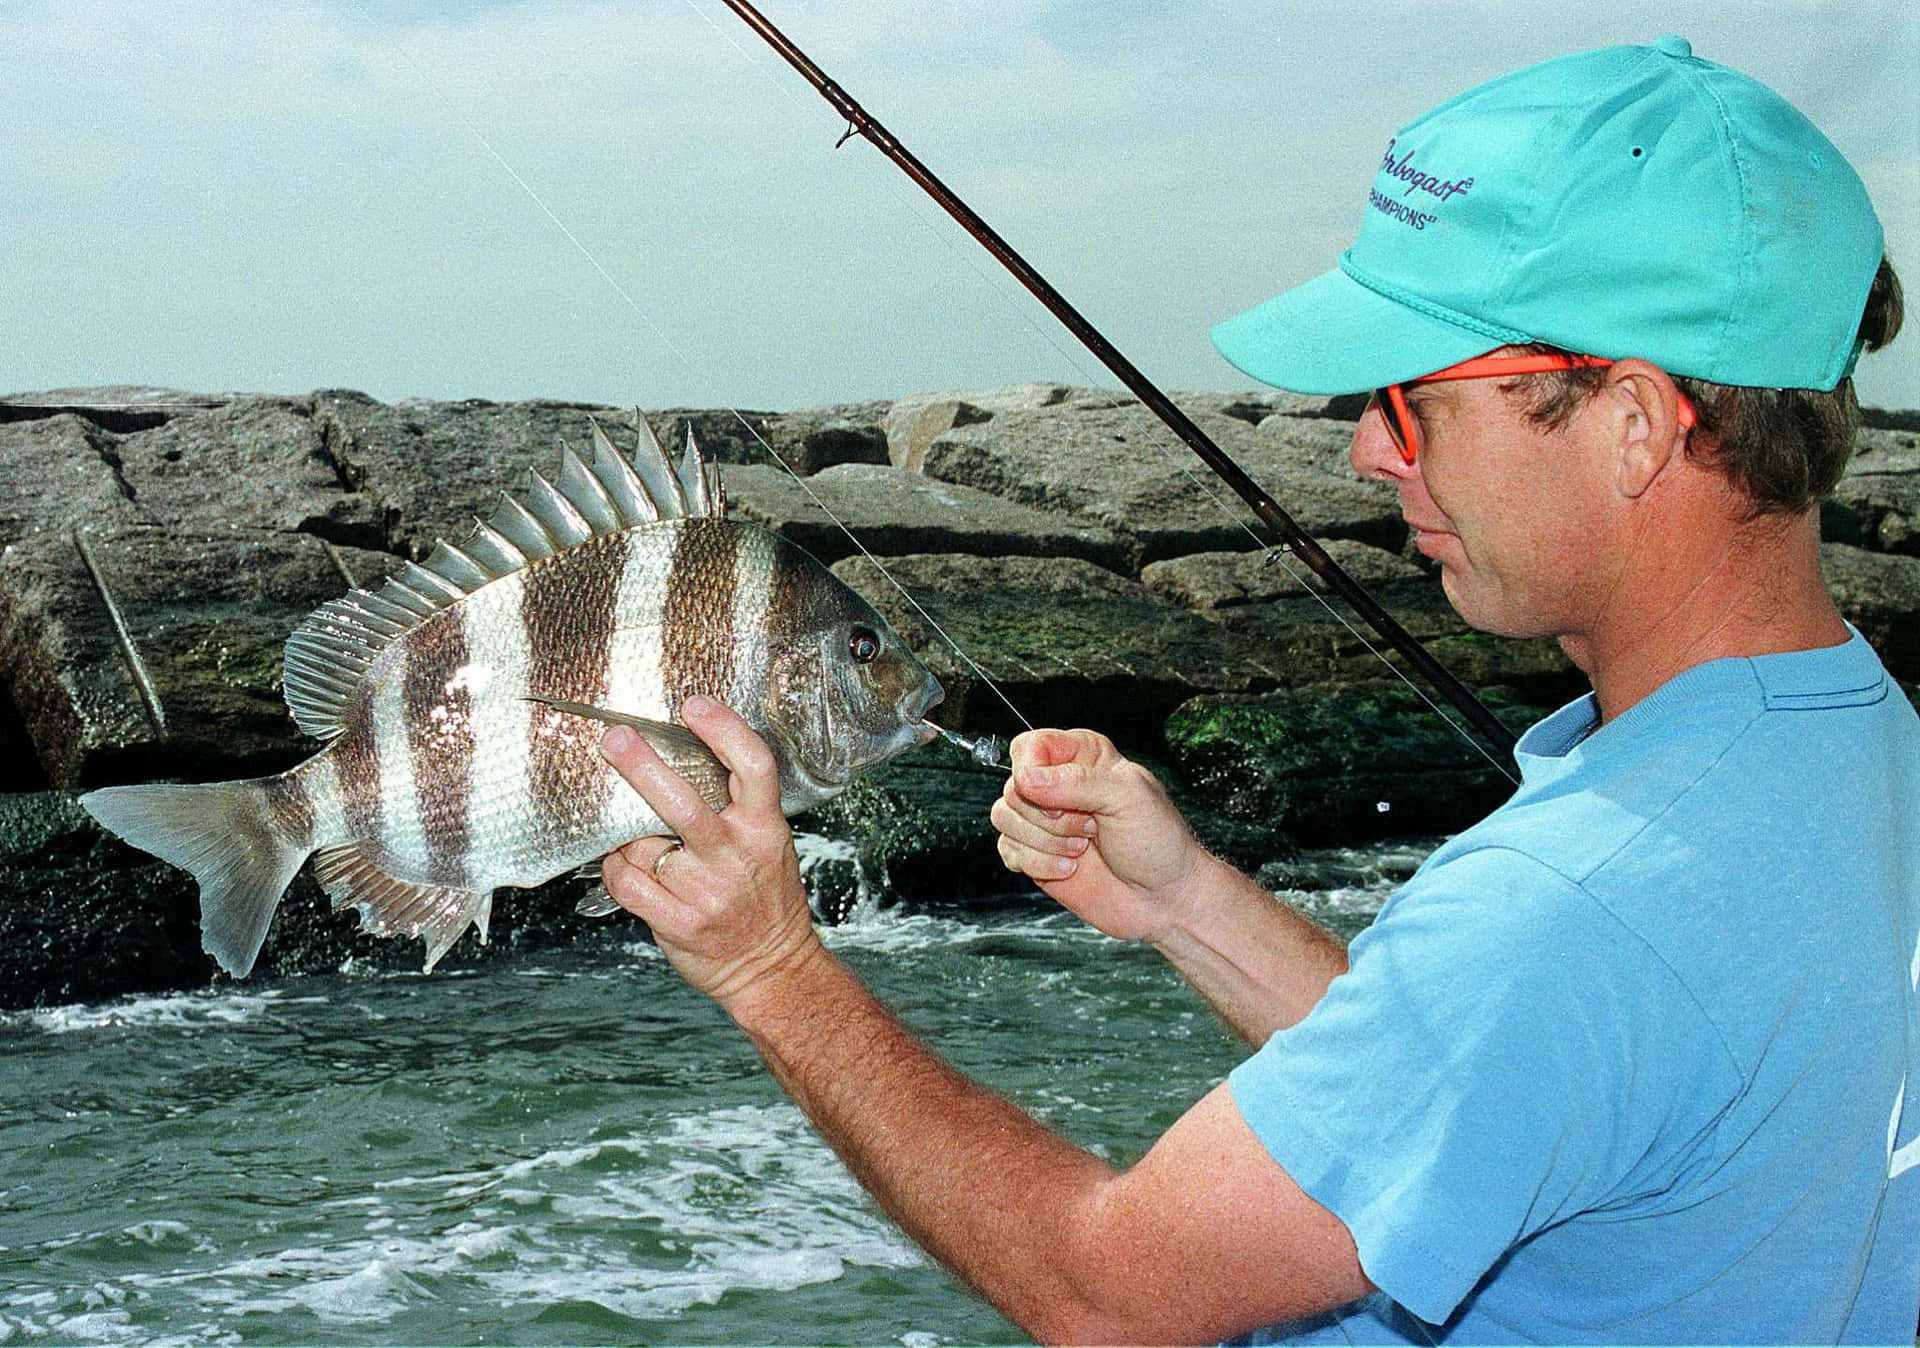 "Meet the Sheepshead Fish, one of Florida's most sought-after catches!"